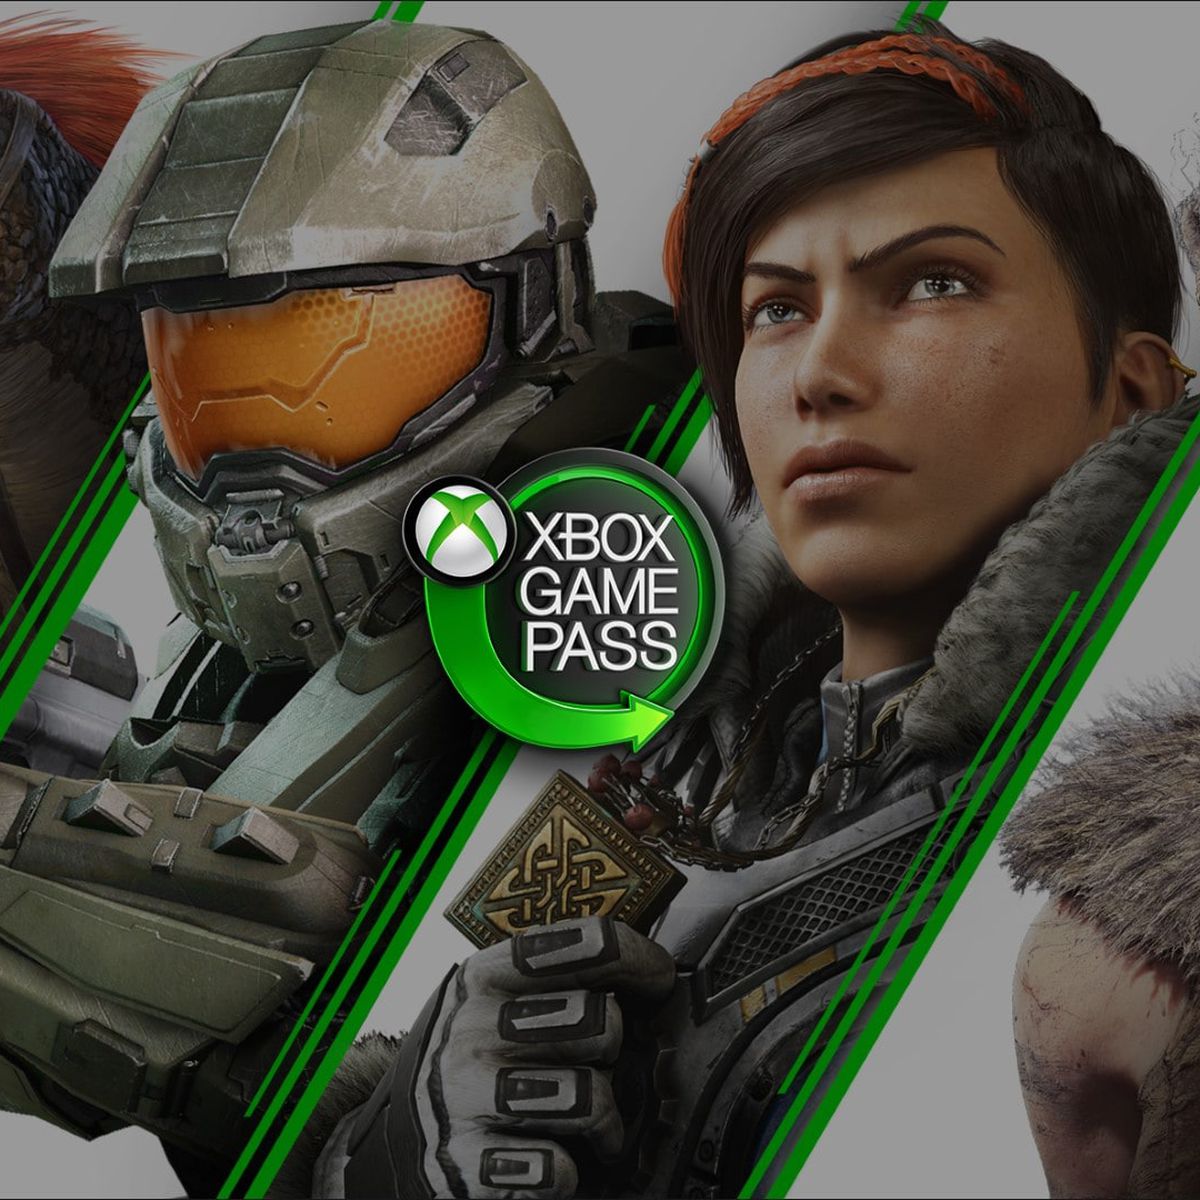 Artwork from Ark Survival Evolved, Halo, Hellblade, and Gears 5 to promote Xbox Game Pass PC